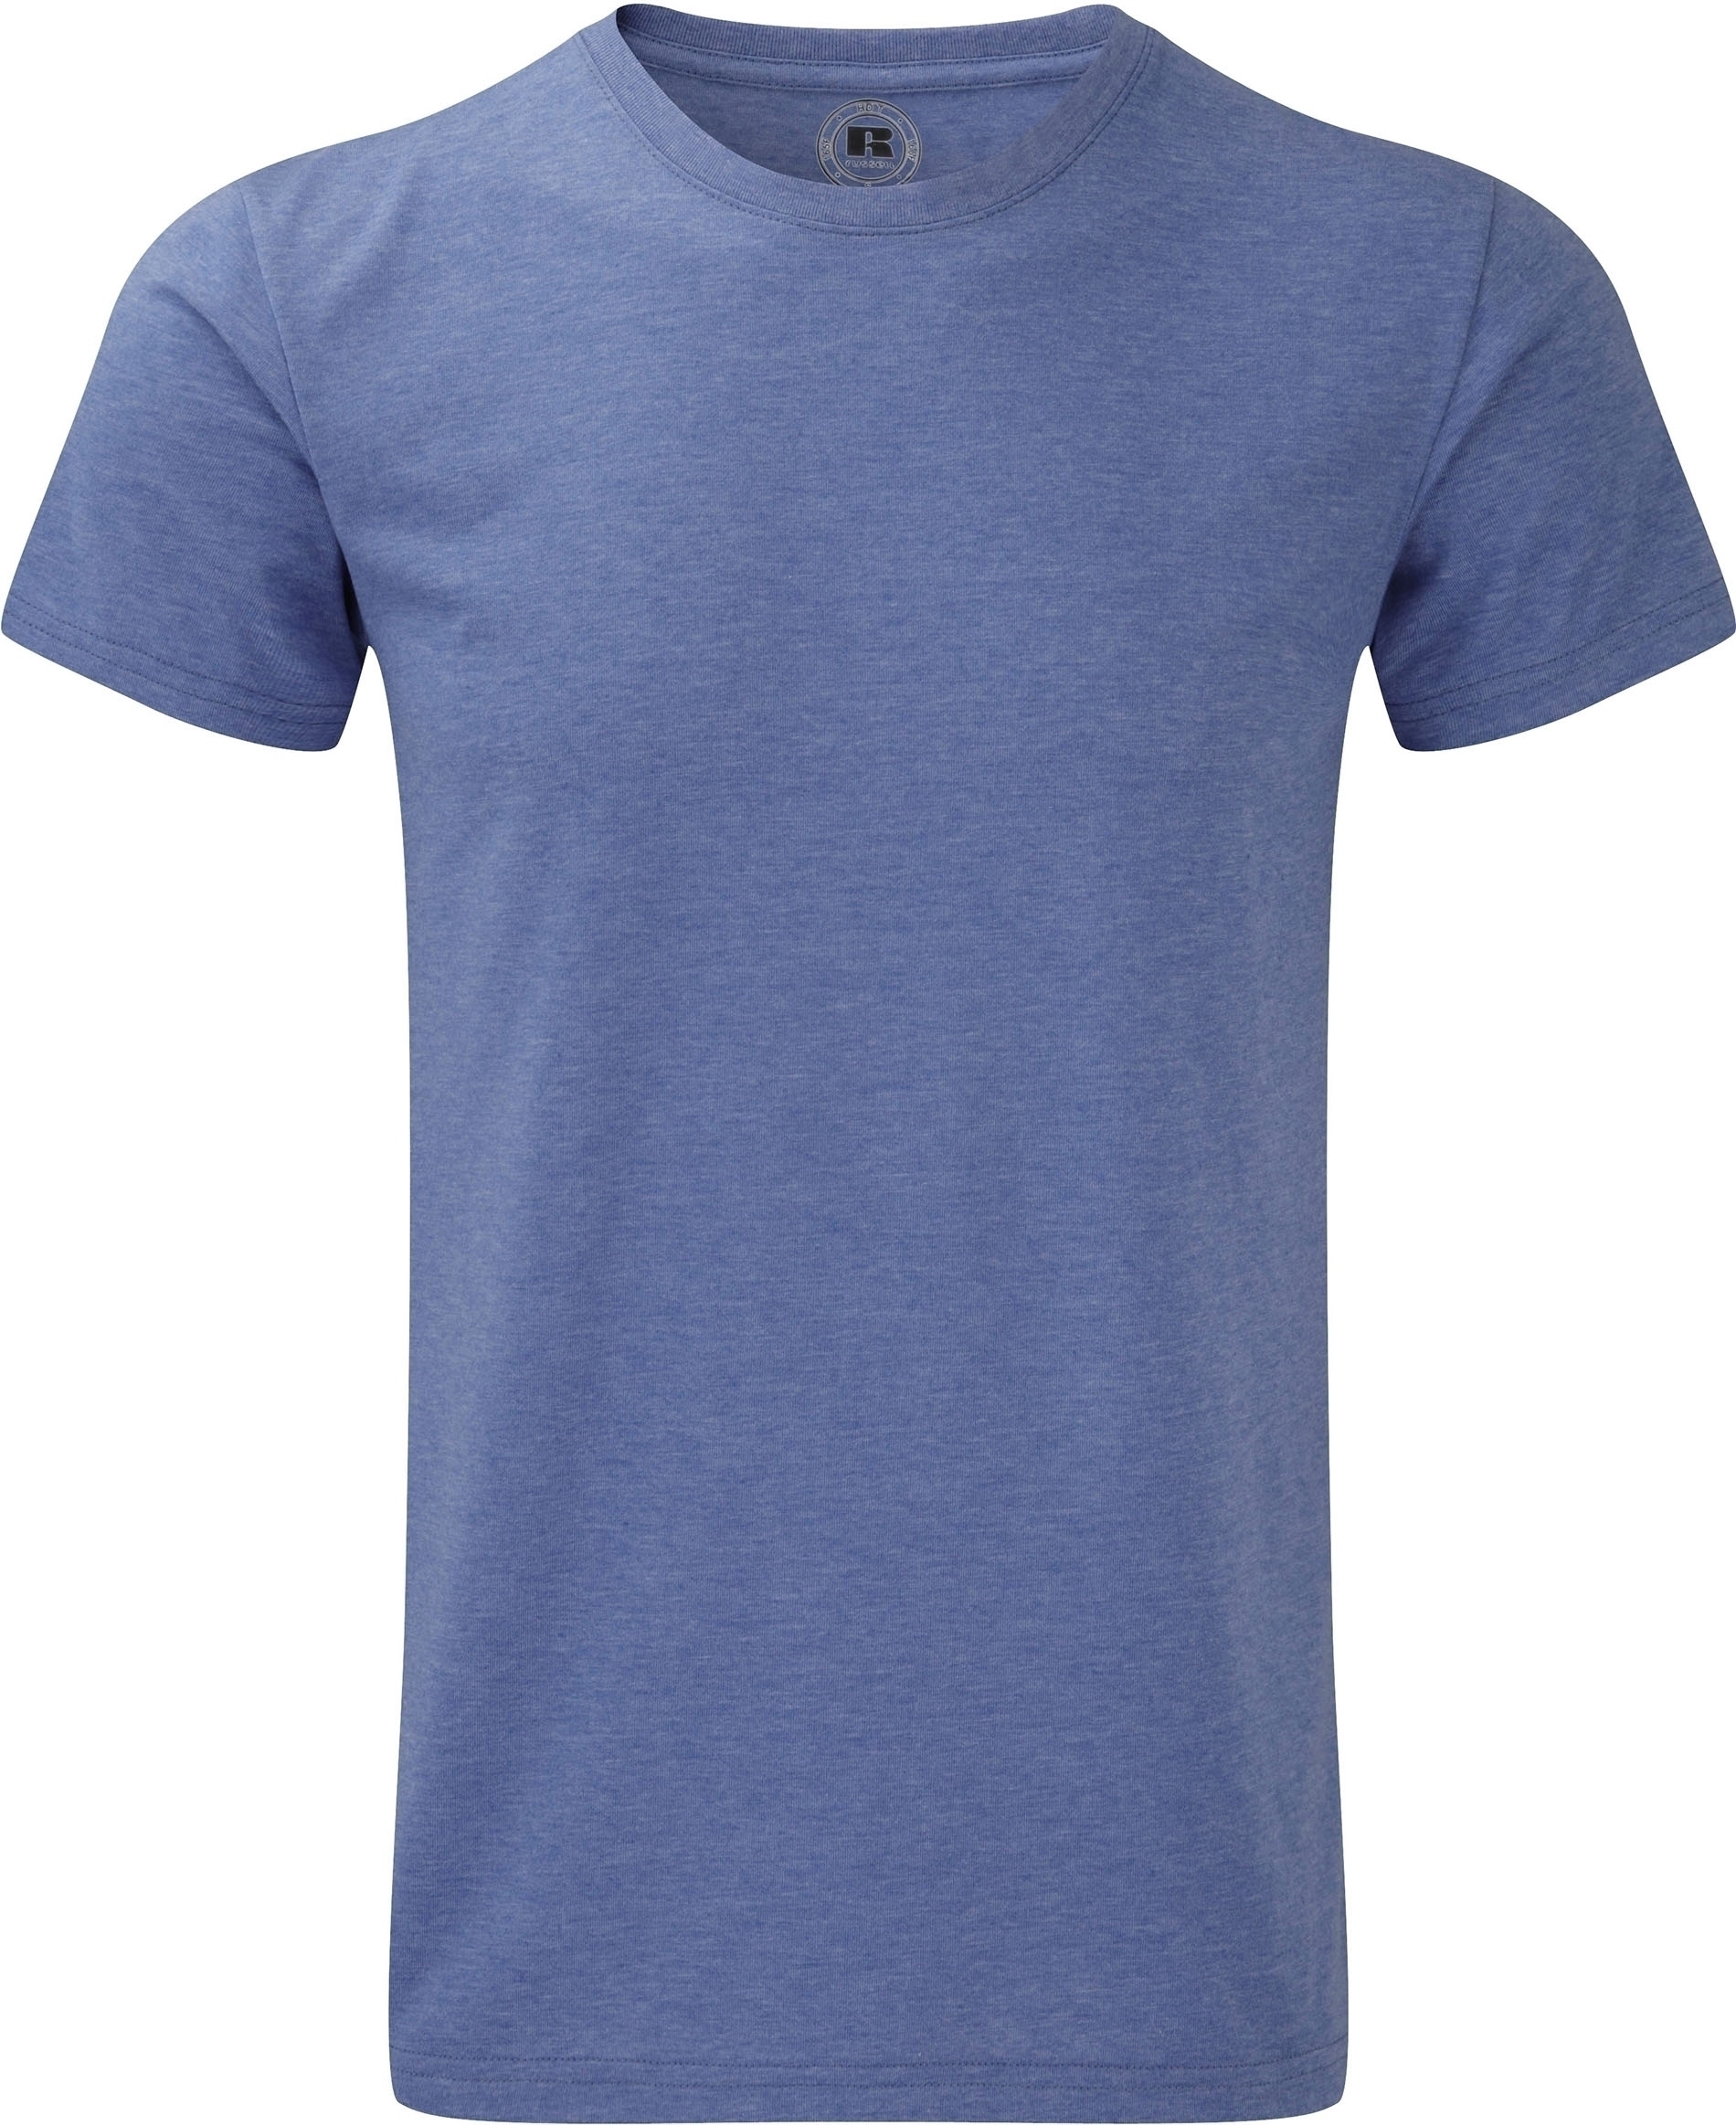 T-SHIRT HOMME COL ROND HD Coral Marl rose